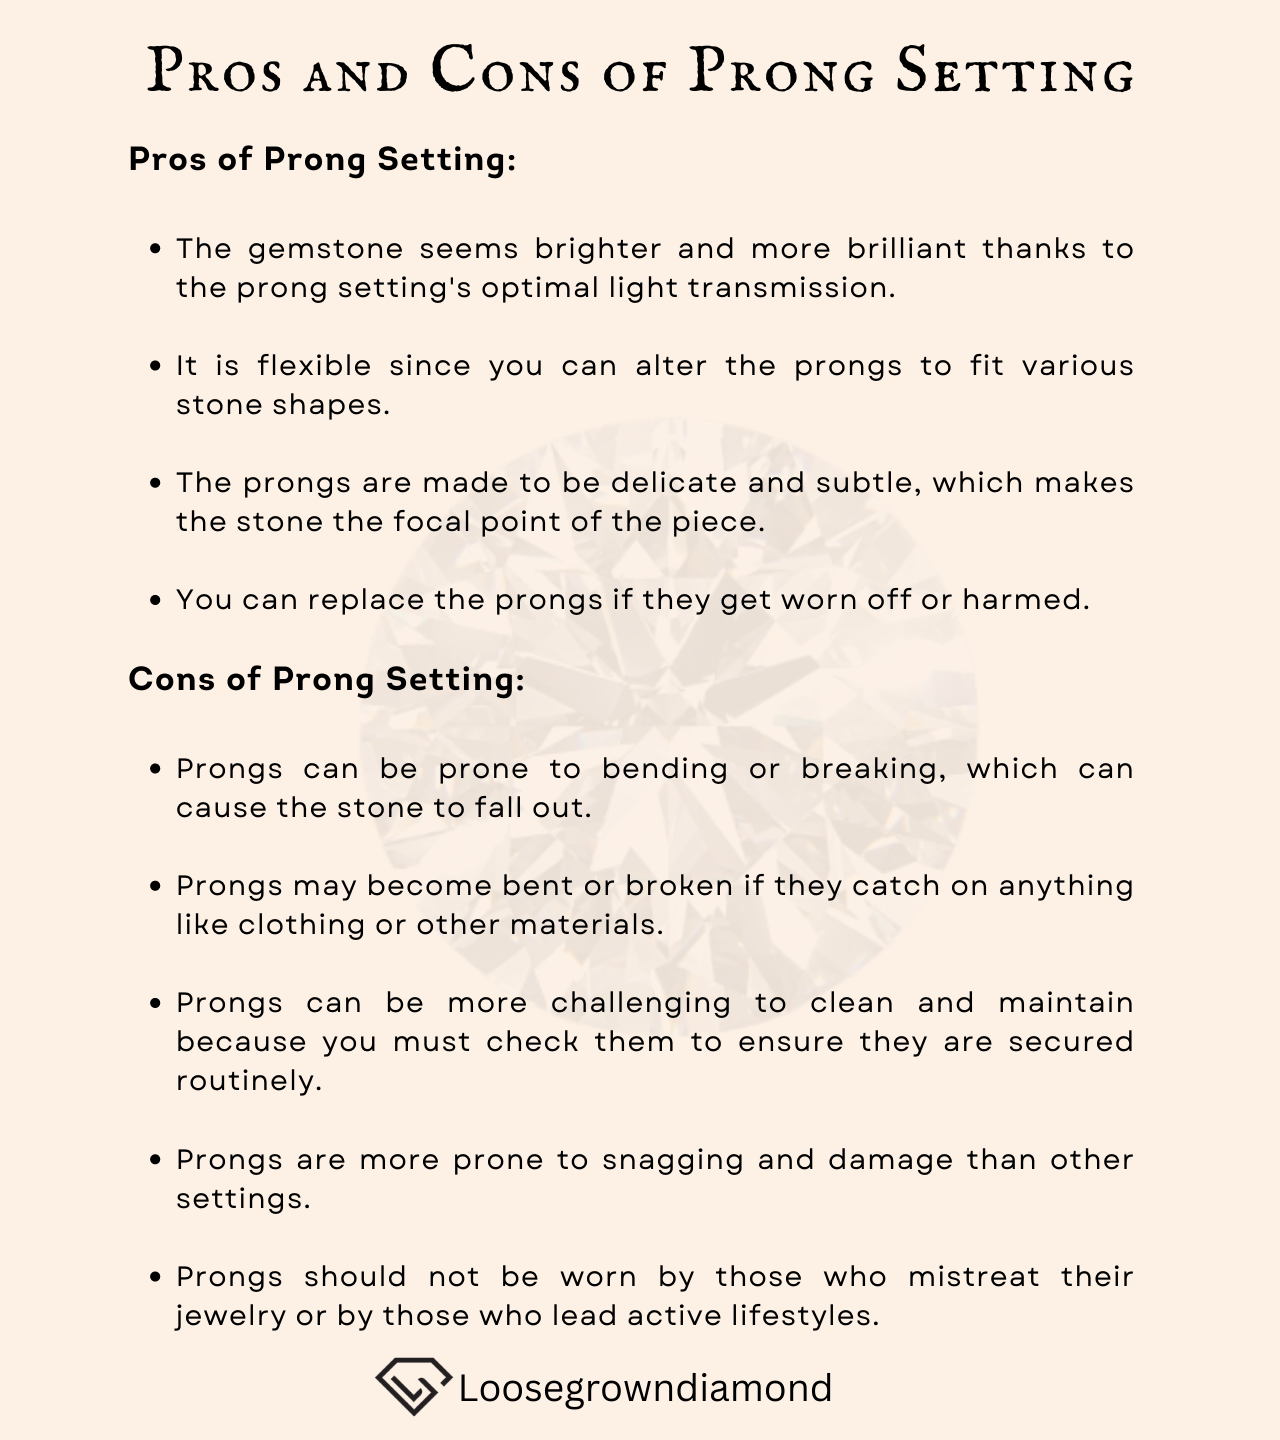 all advantages and disadvantages of prong setting